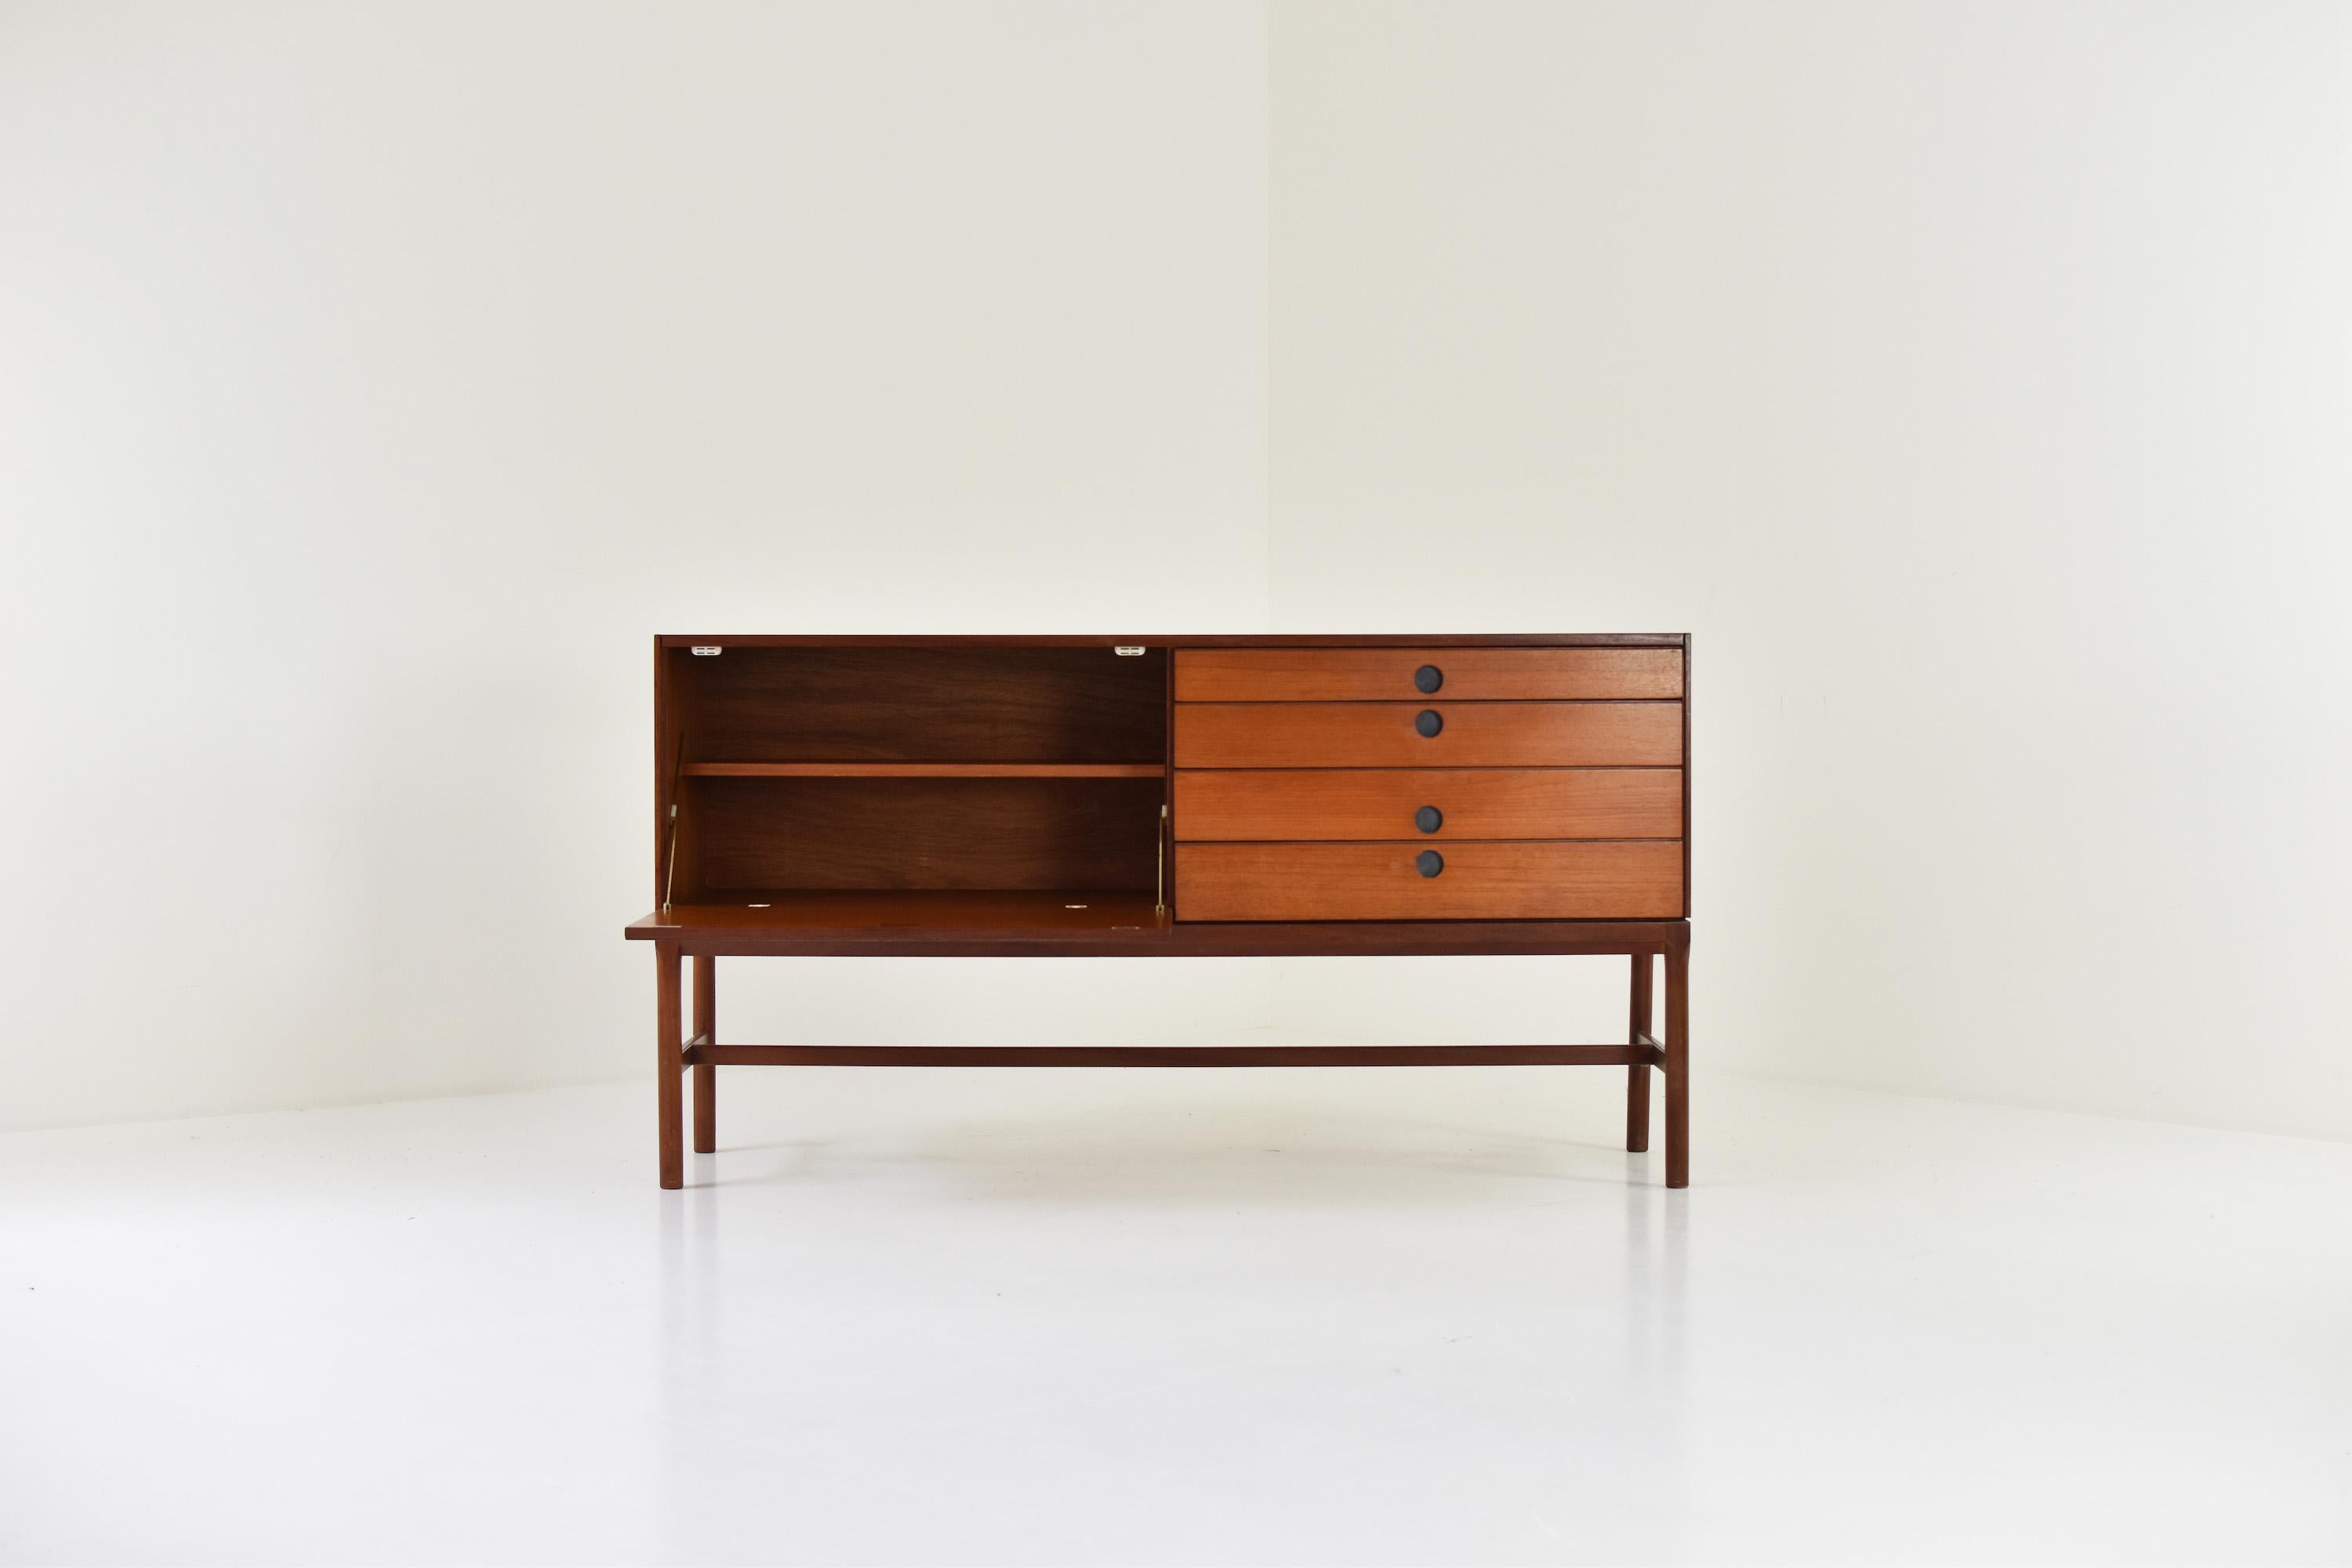 Rarely seen sideboard in teak by Philip Hussey for White & Newton, United Kingdom 1969. This low sideboard has a drop down door on the left and a series of drawers on the right. Good original condition with only minor wear. Labeled.